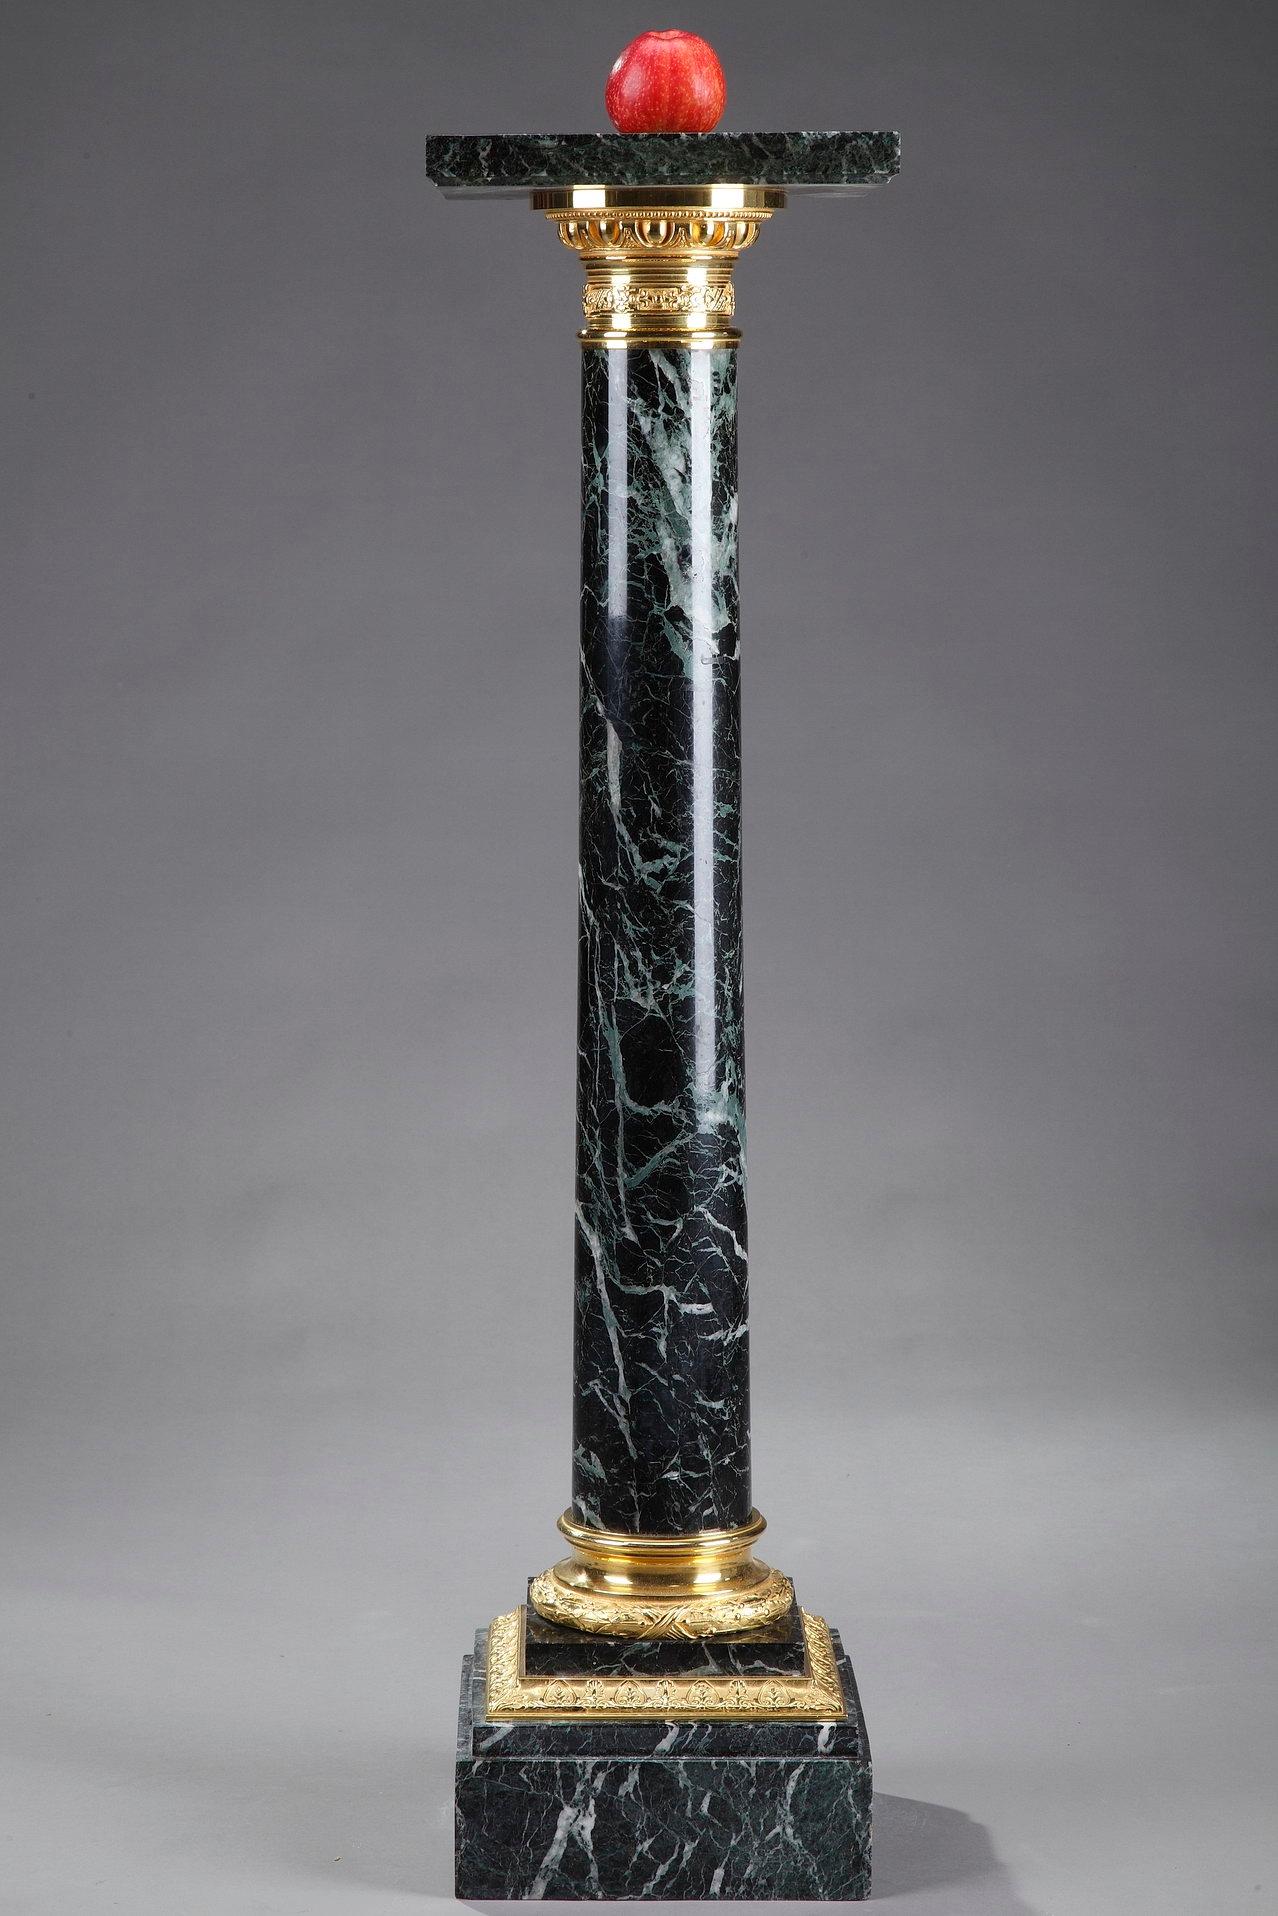 Green Vert-de-Mer marble pedestal with ormolu bronze cap and base. The capital is embellished with gadroon, pearls and floral motif, and the base is decorated with laurel and ribbon. This display column is set on a square, terraced base, highlighted